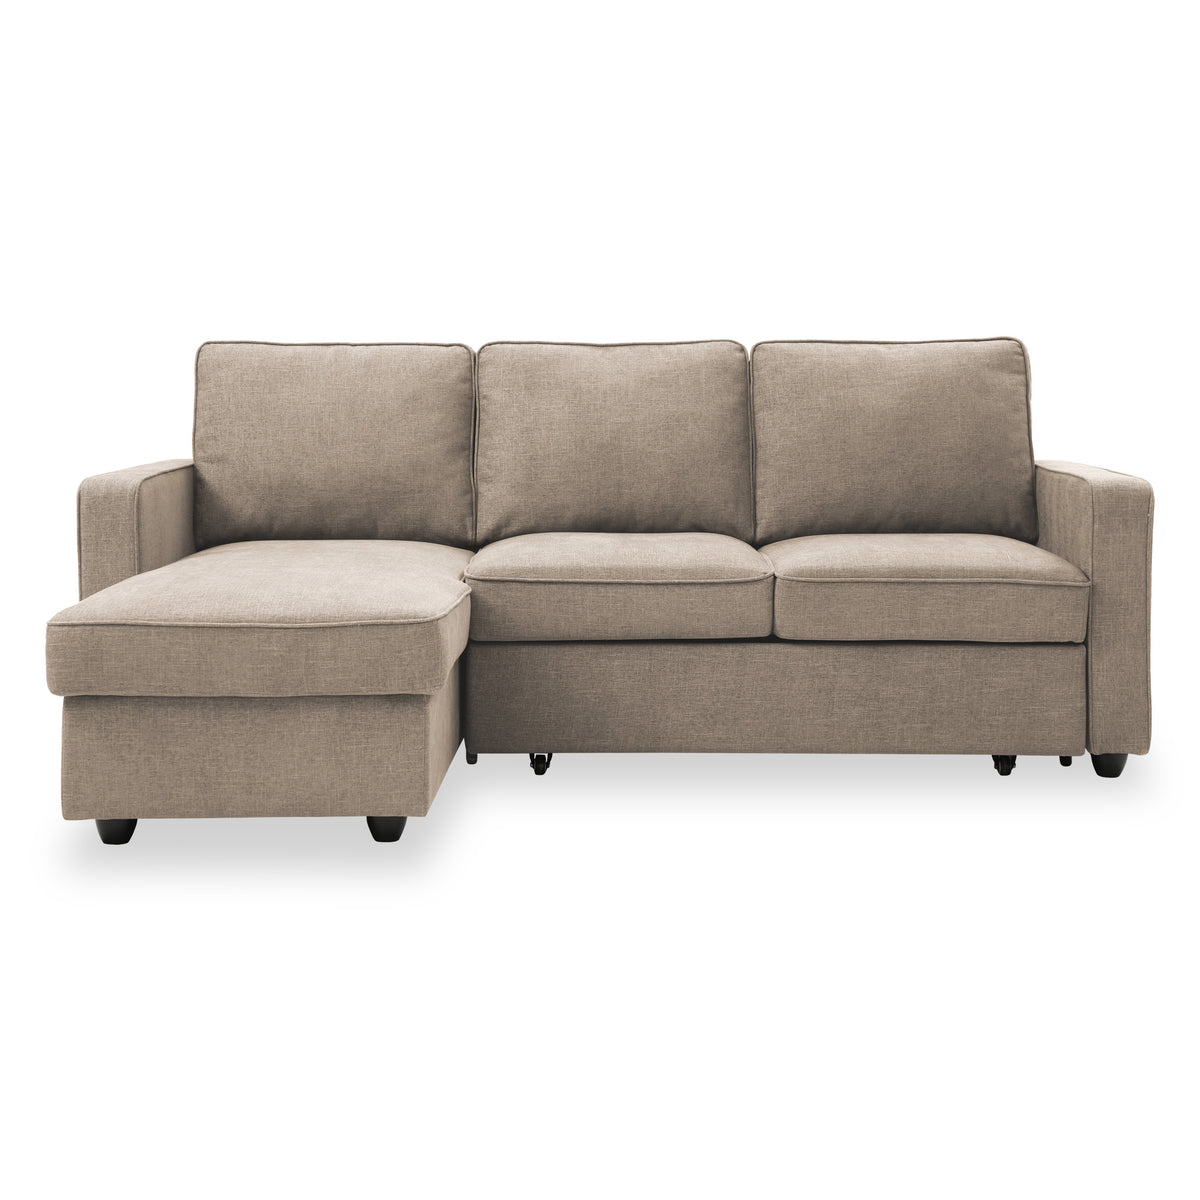 Solr Grey 3 Seater Corner Sofa Bed Chaise Couch Roseland Furniture